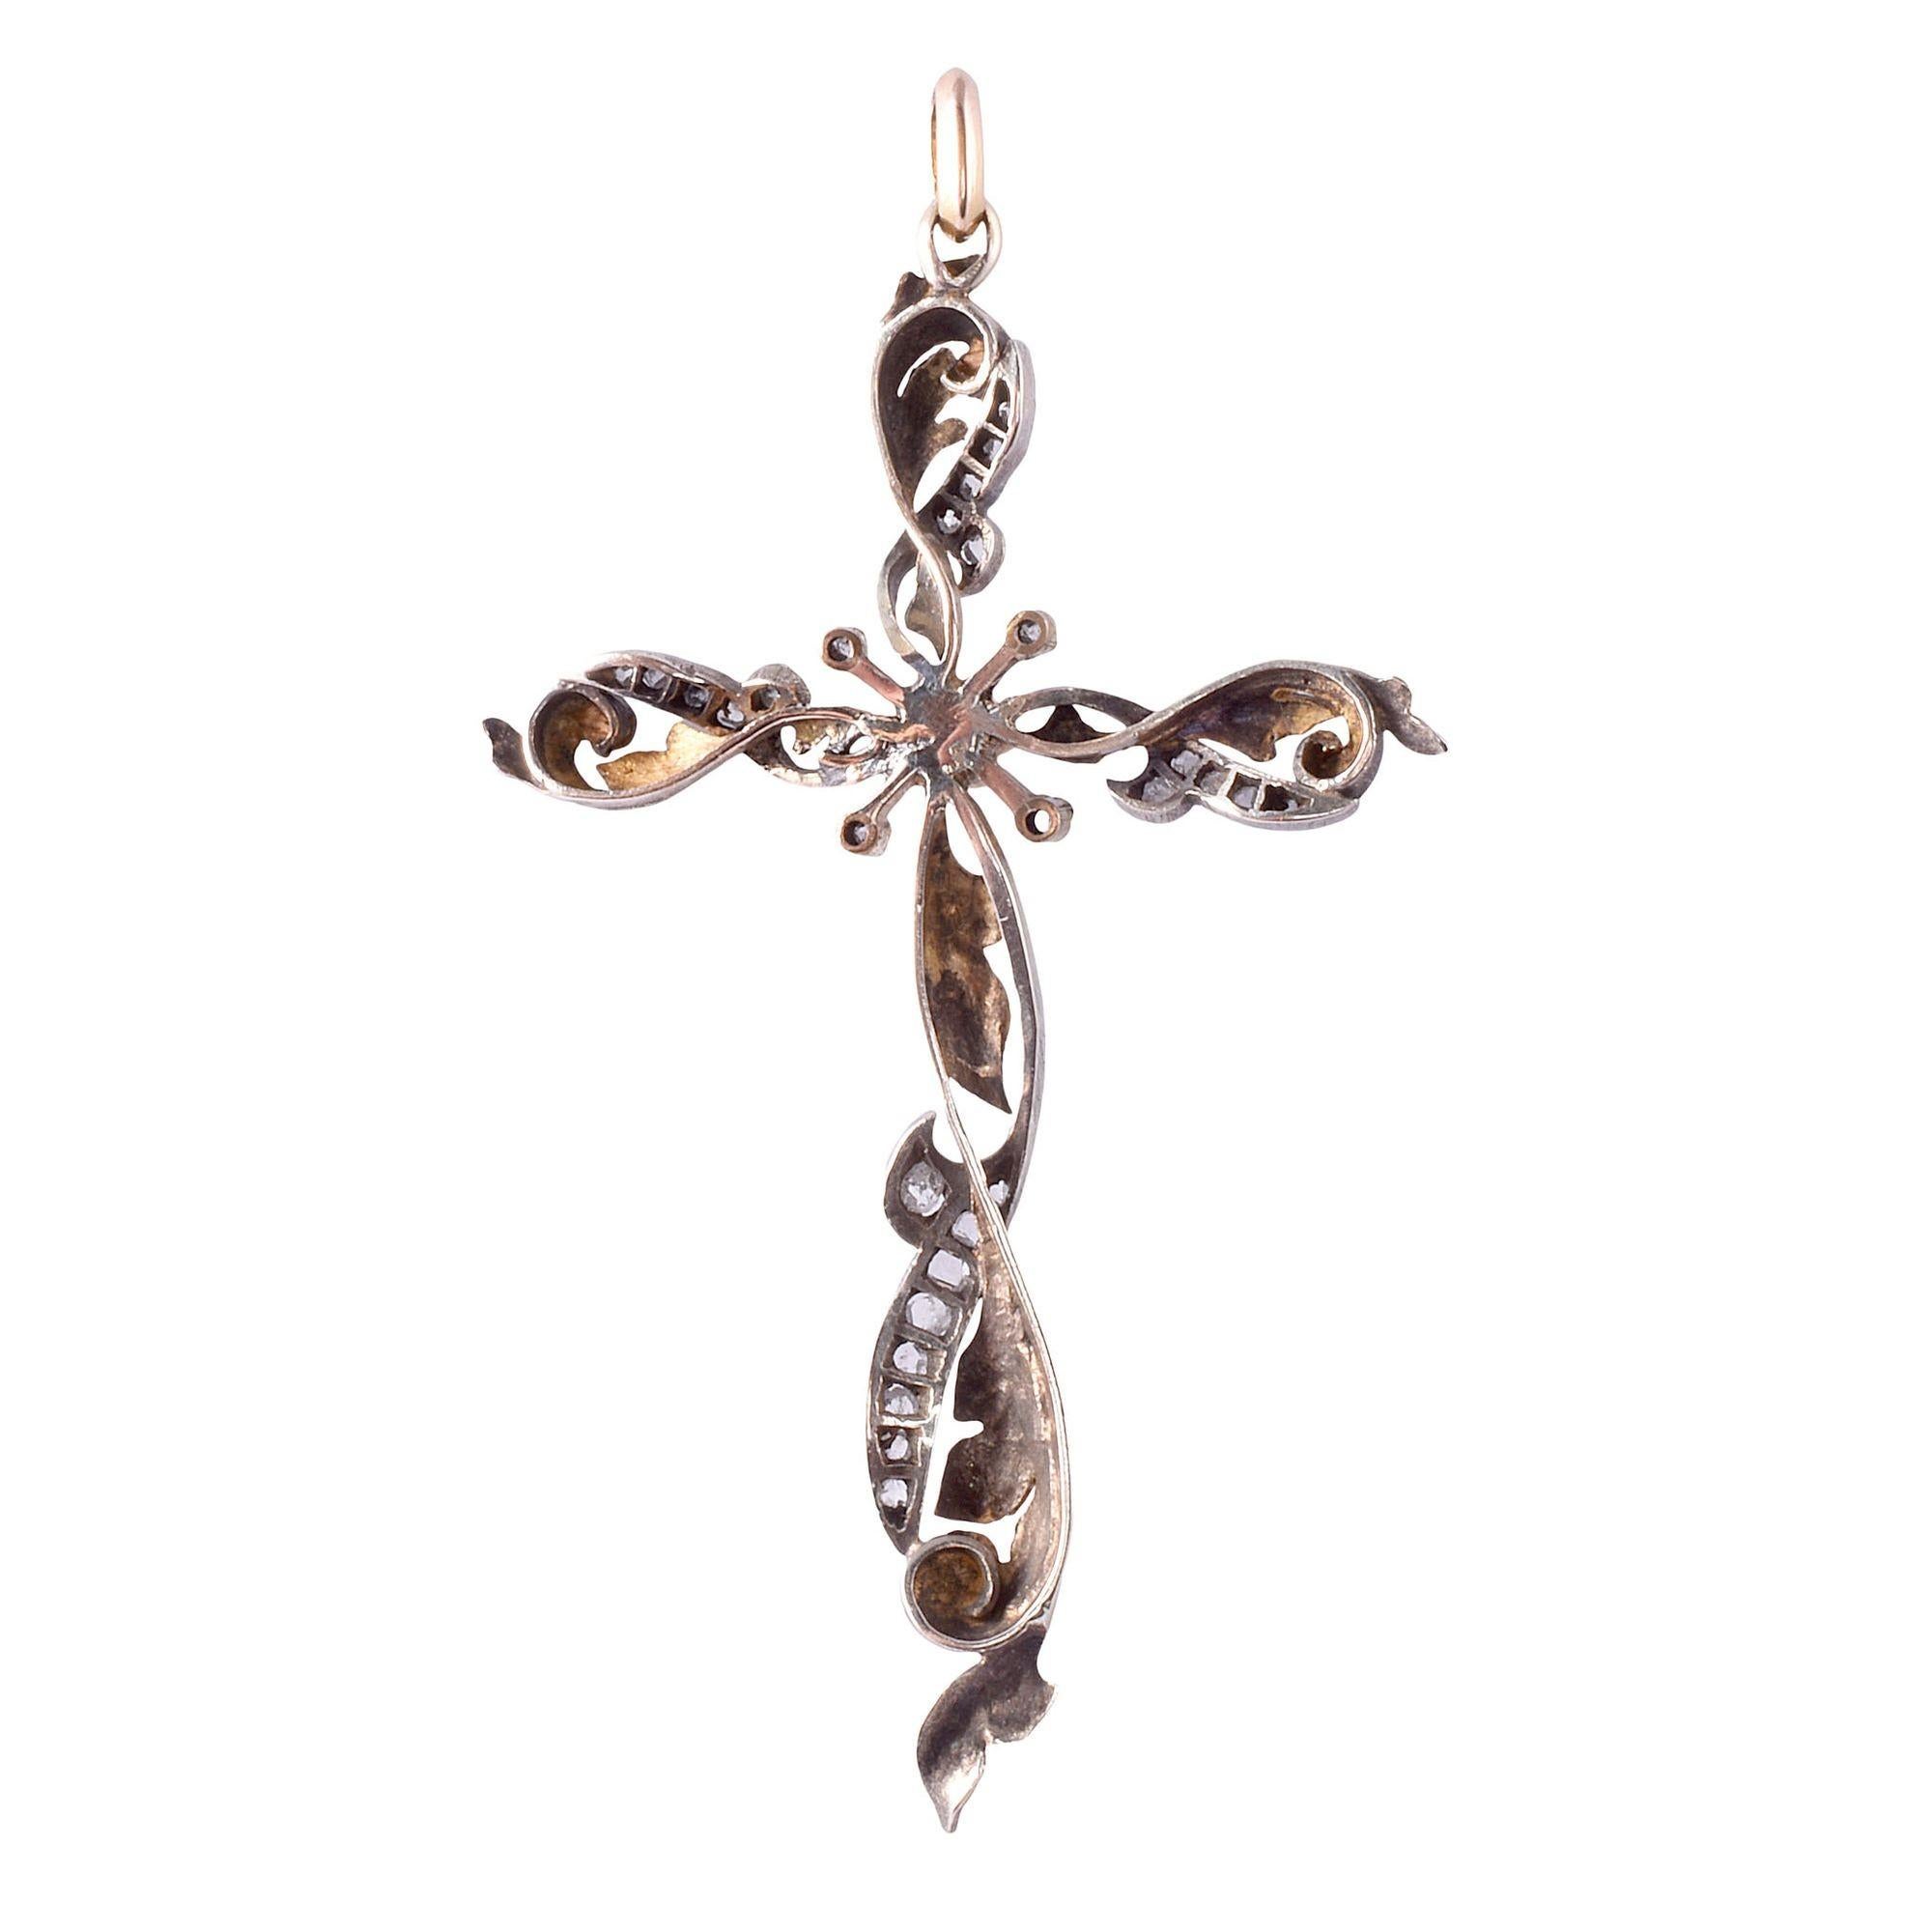 Antique Art Nouveau foliate pearl & diamond cross pendant, circa 1915. This antique cross pendant is crafted in 18 karat gold and silver in a foliate design. The Art Nouveau cross features 27 rose cut diamonds and a 5.85mm pearl center. [KIMH